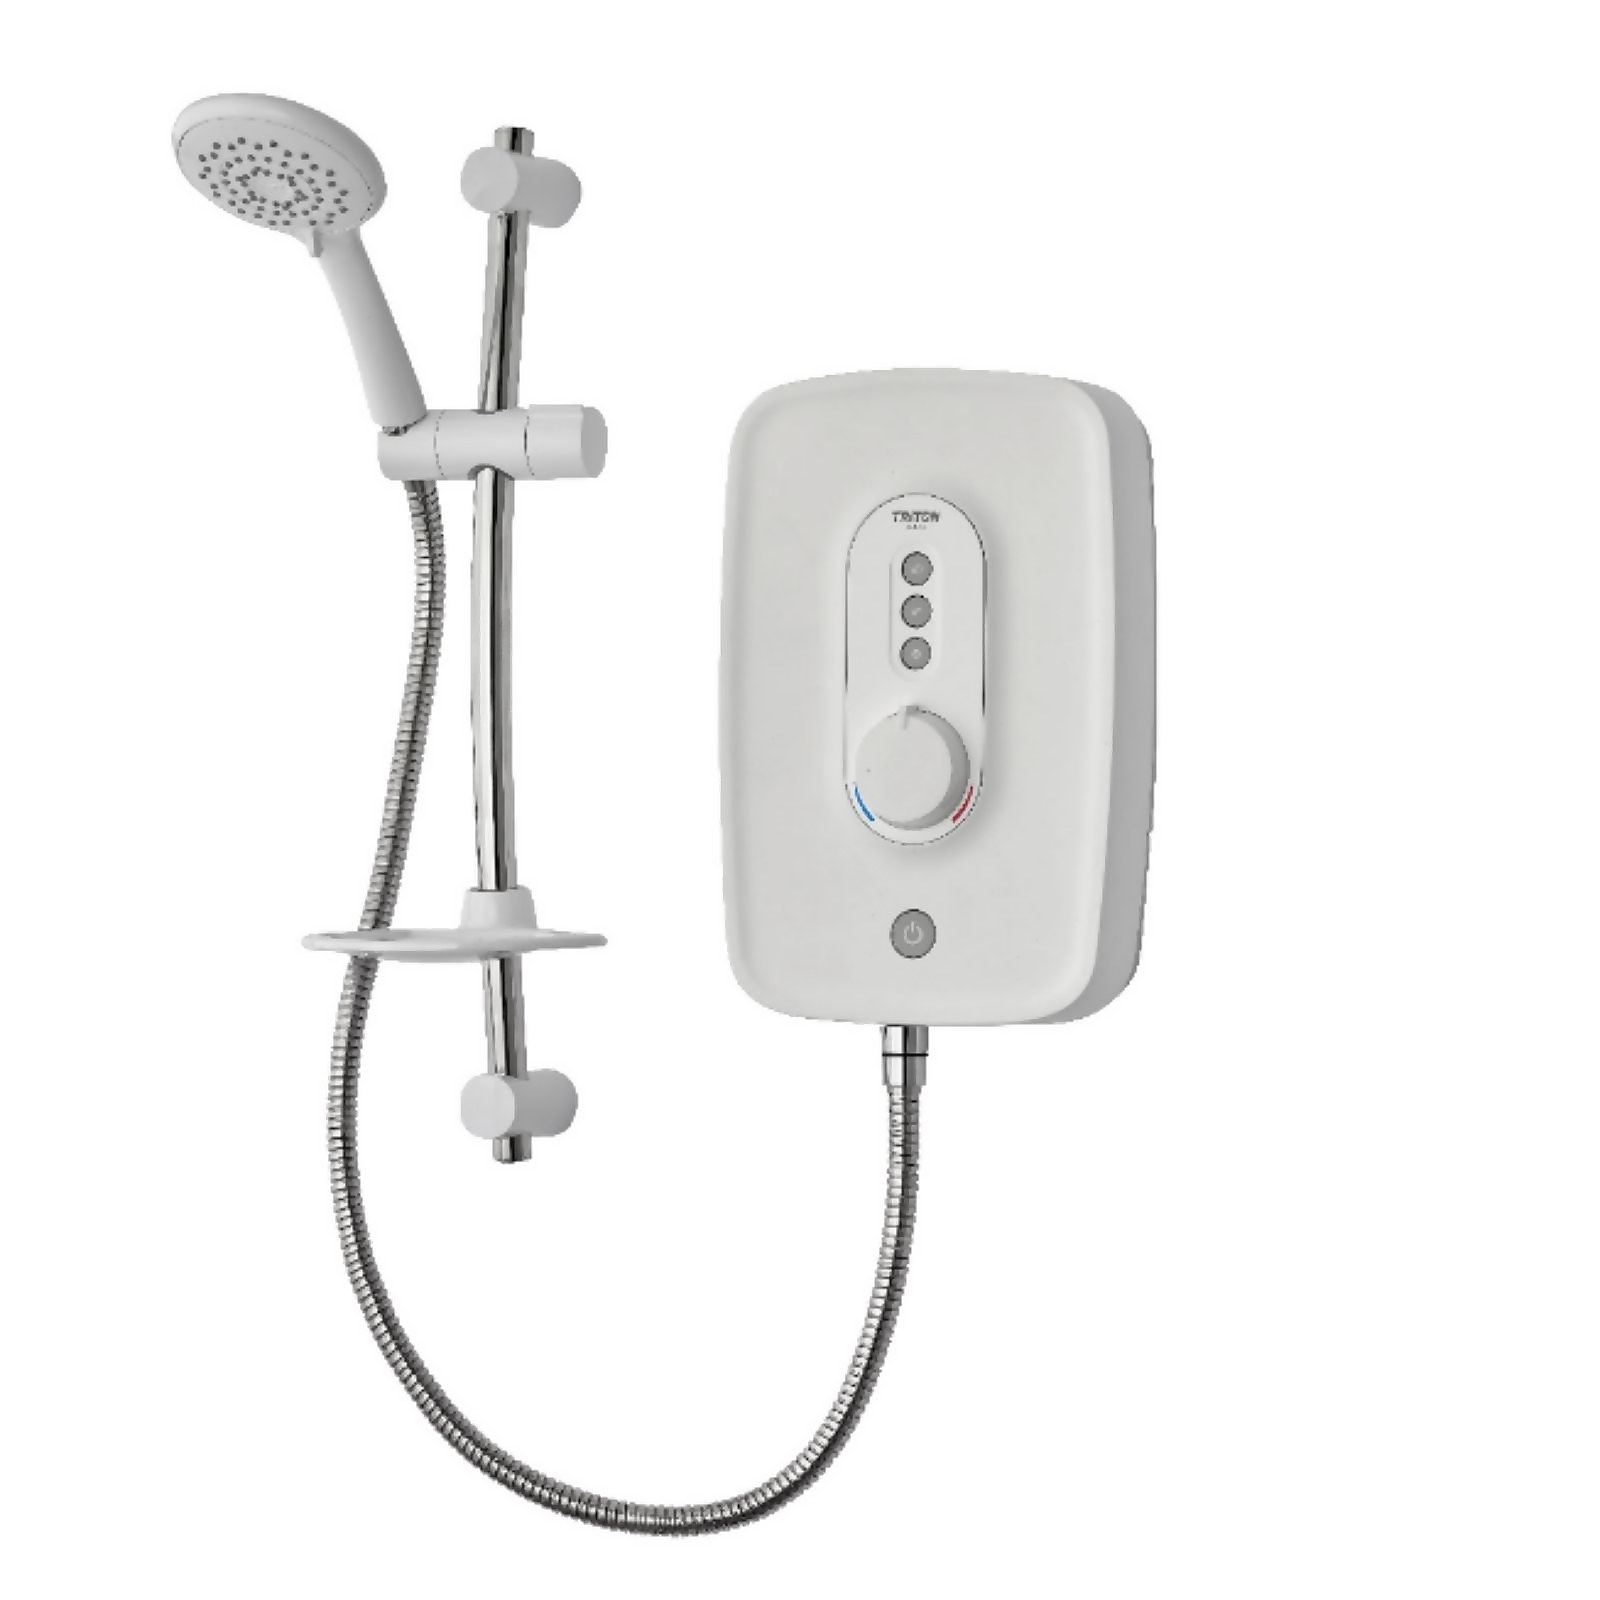 Photo of Triton Opal 4 8.5kw Electric Shower - White